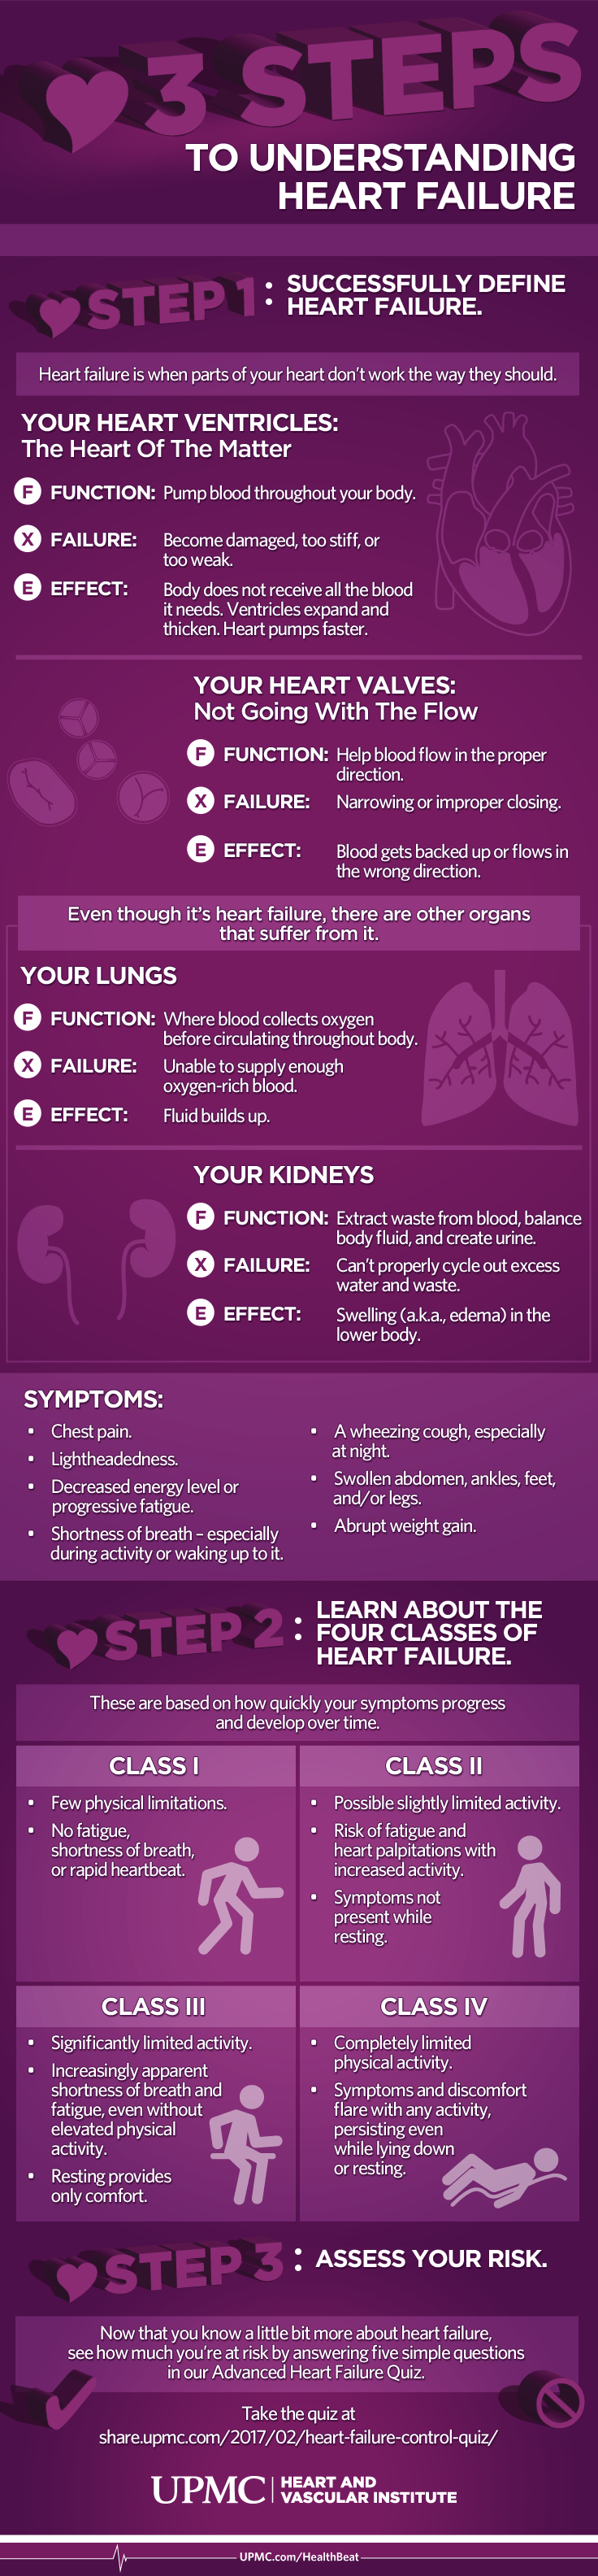 Learn more about heart failure with this infographic